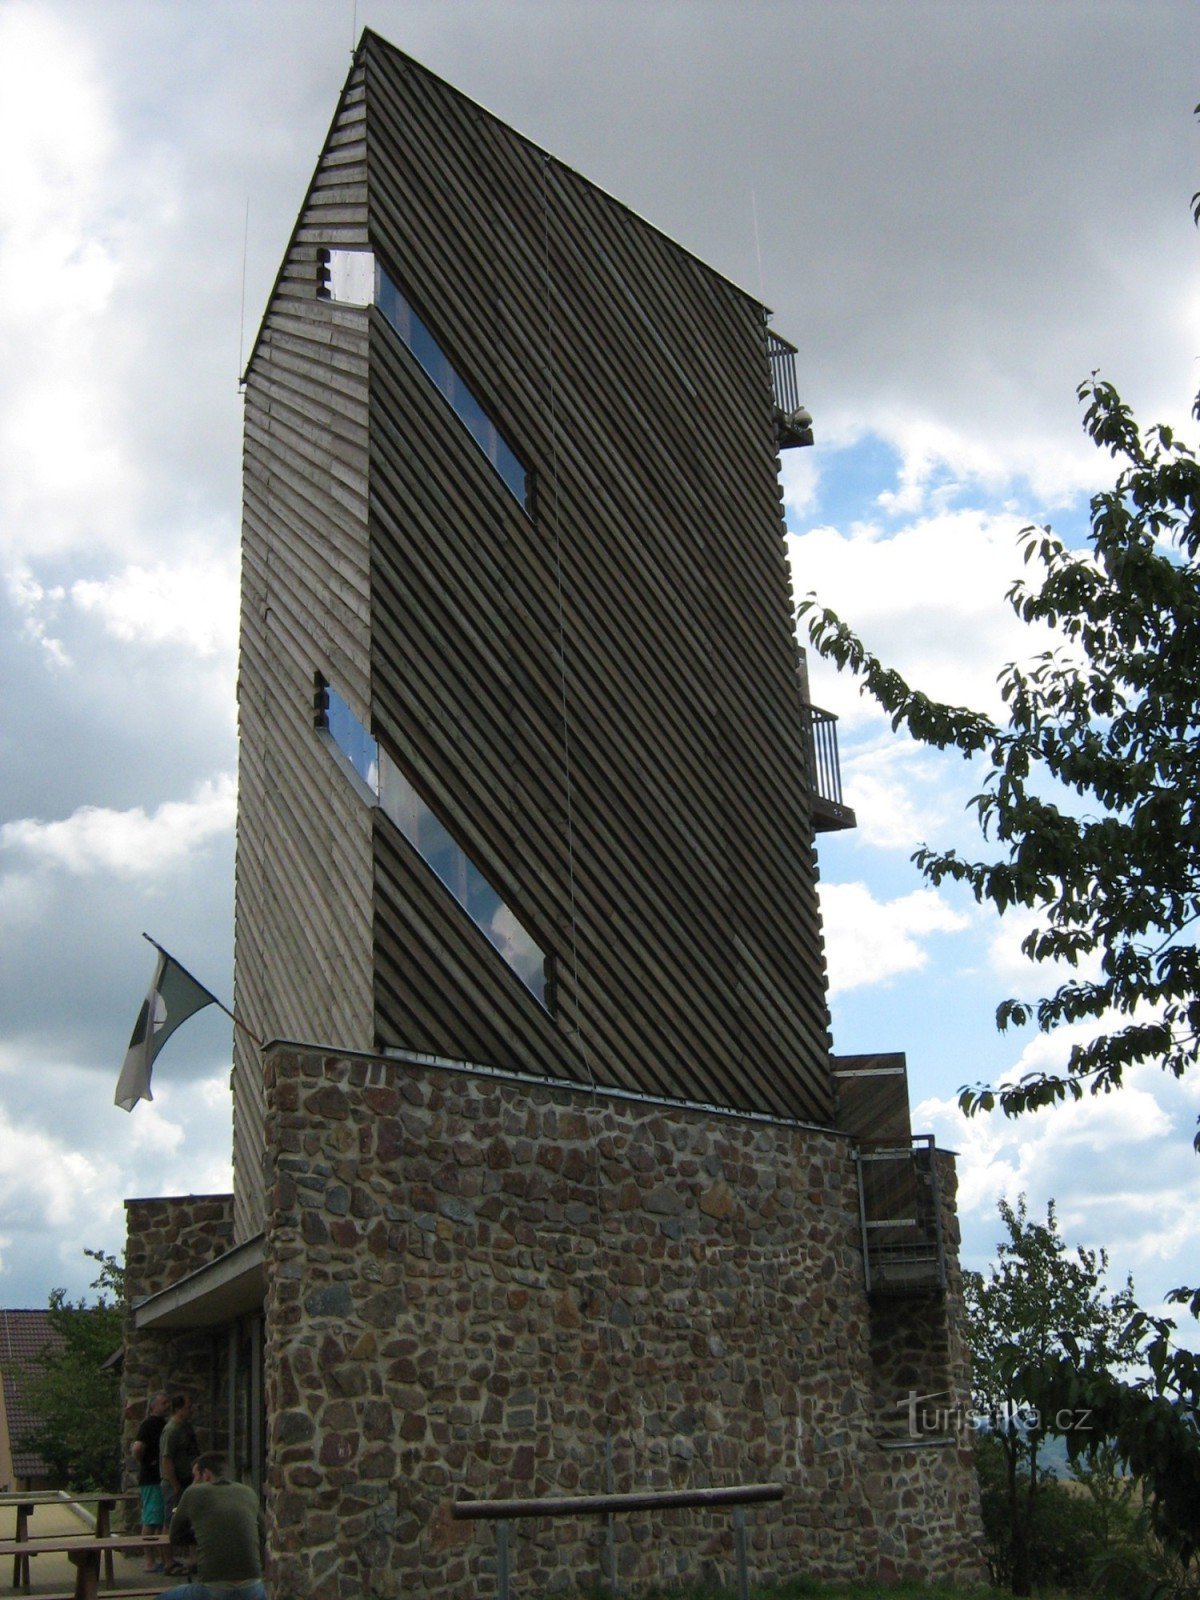 View of the lookout tower